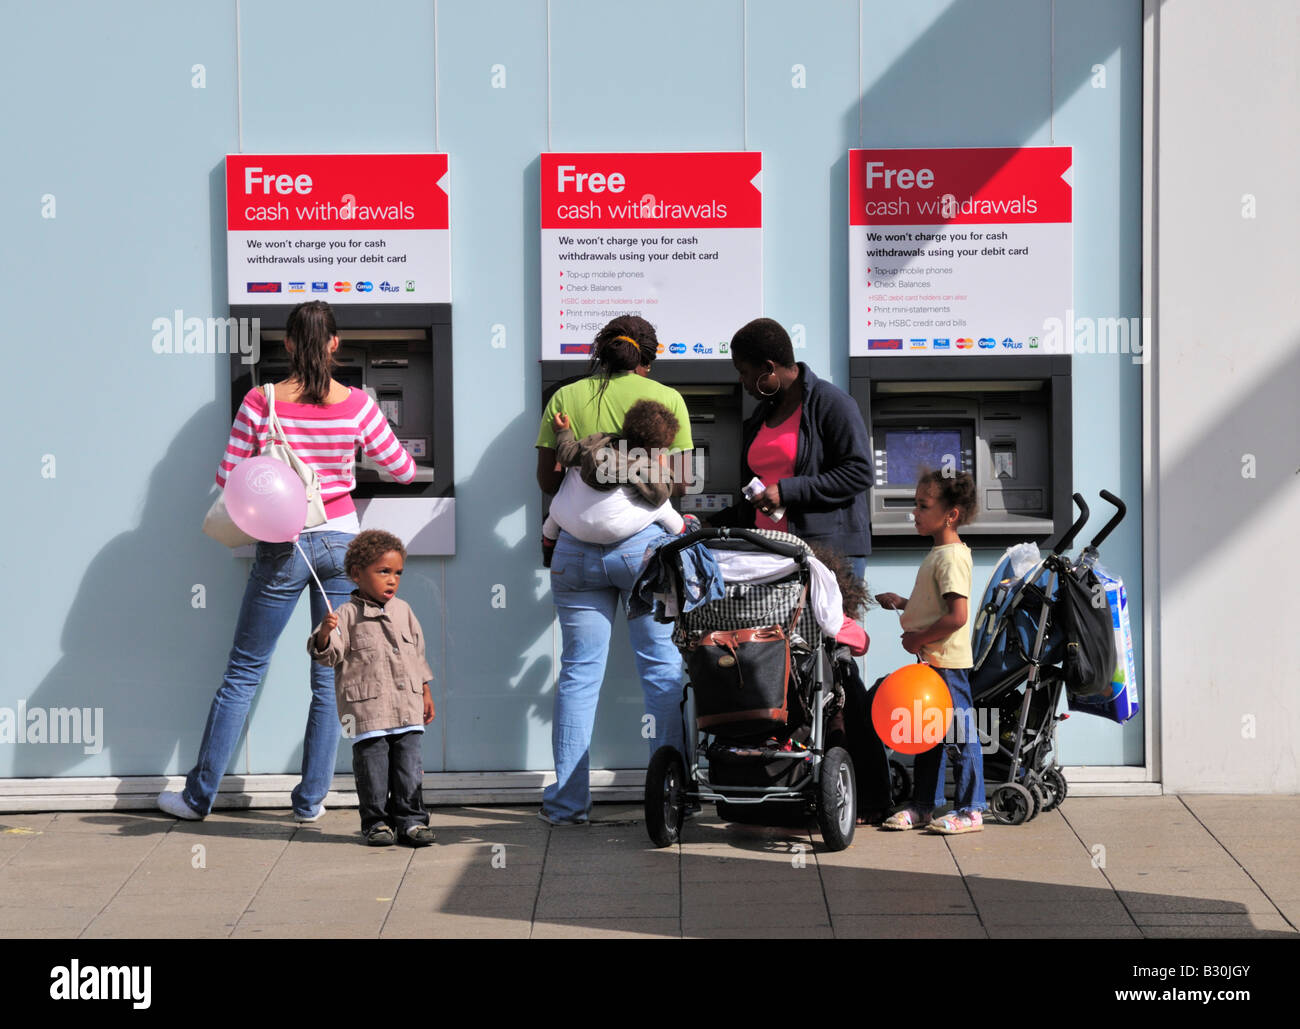 A family with prams, children and a baby, holding balloons, with a single female, using HSBC bank cash machines in Kingston, UK Stock Photo